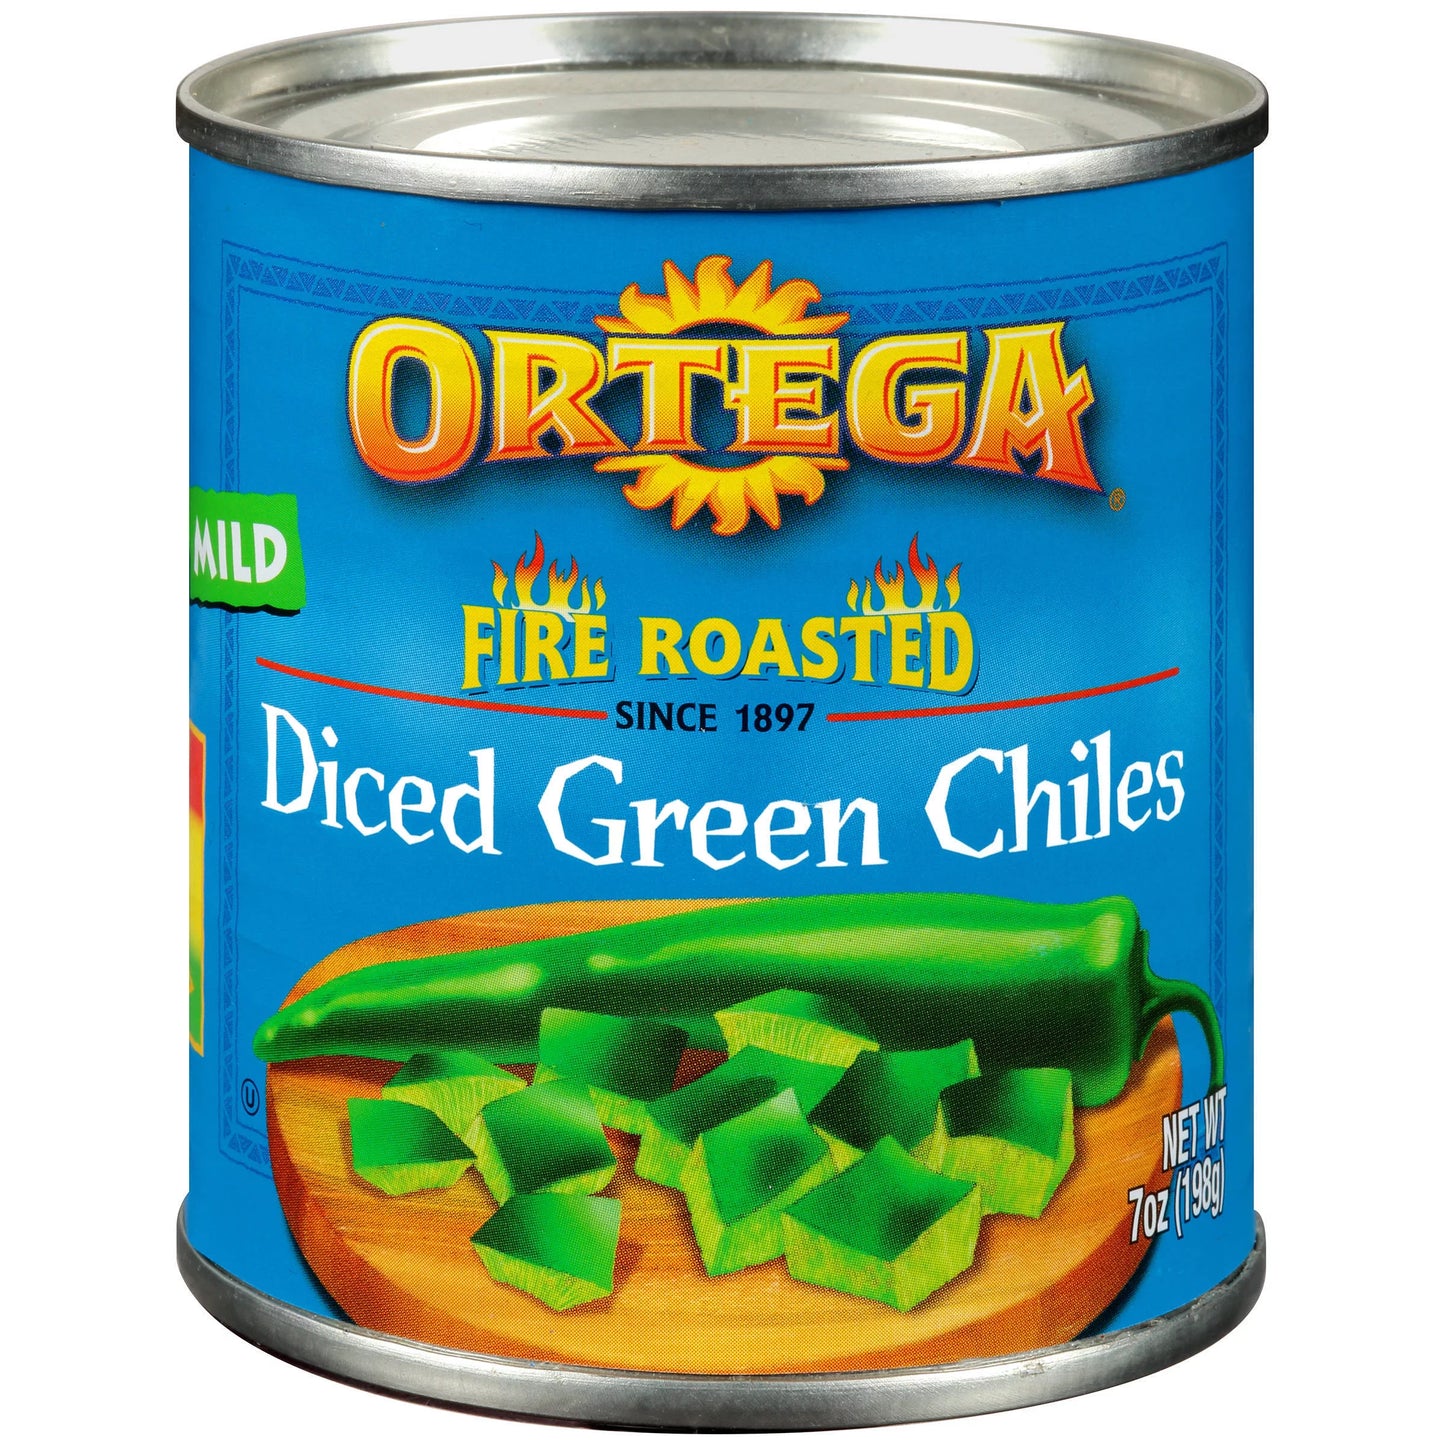 Ortega Diced Green Chiles - Mild 7oz (Large) Best Before March 1 2024